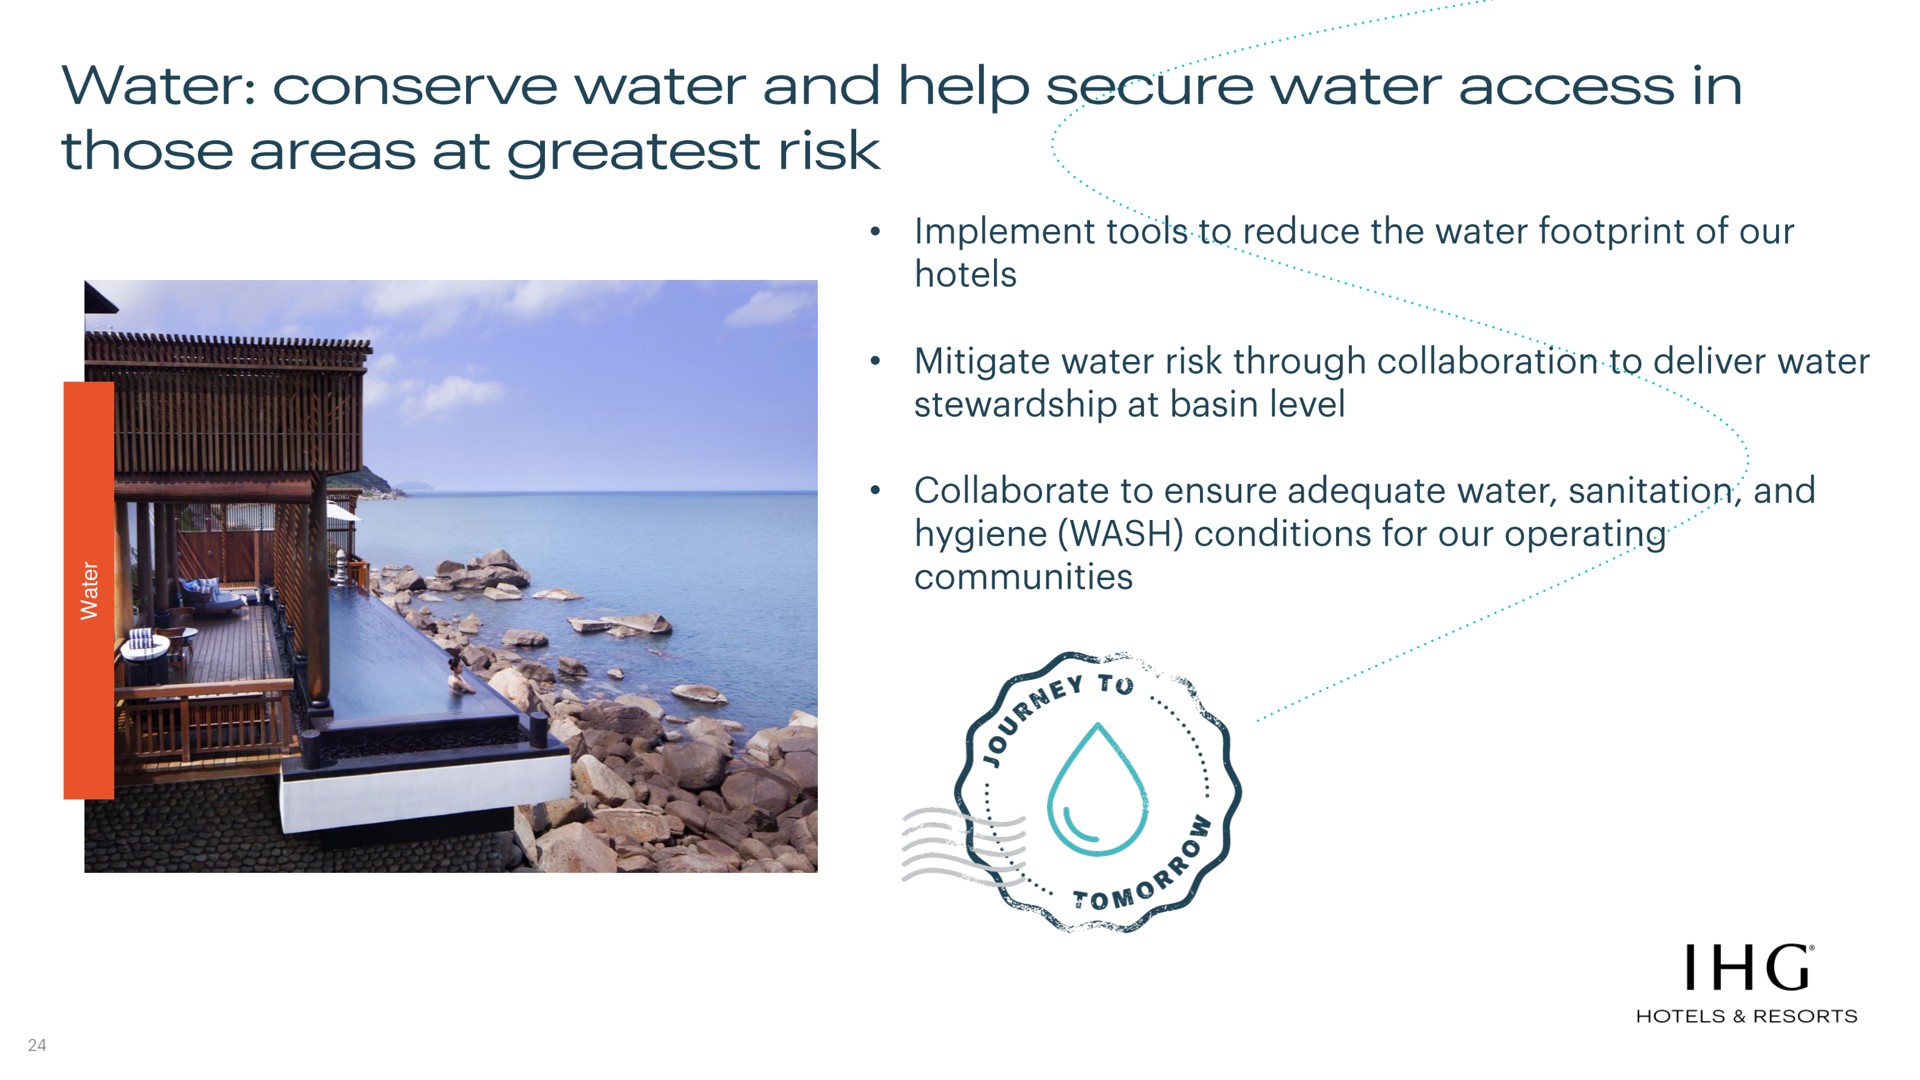 water conserve water and help secure water access in those areas at risk | IHG Hotels